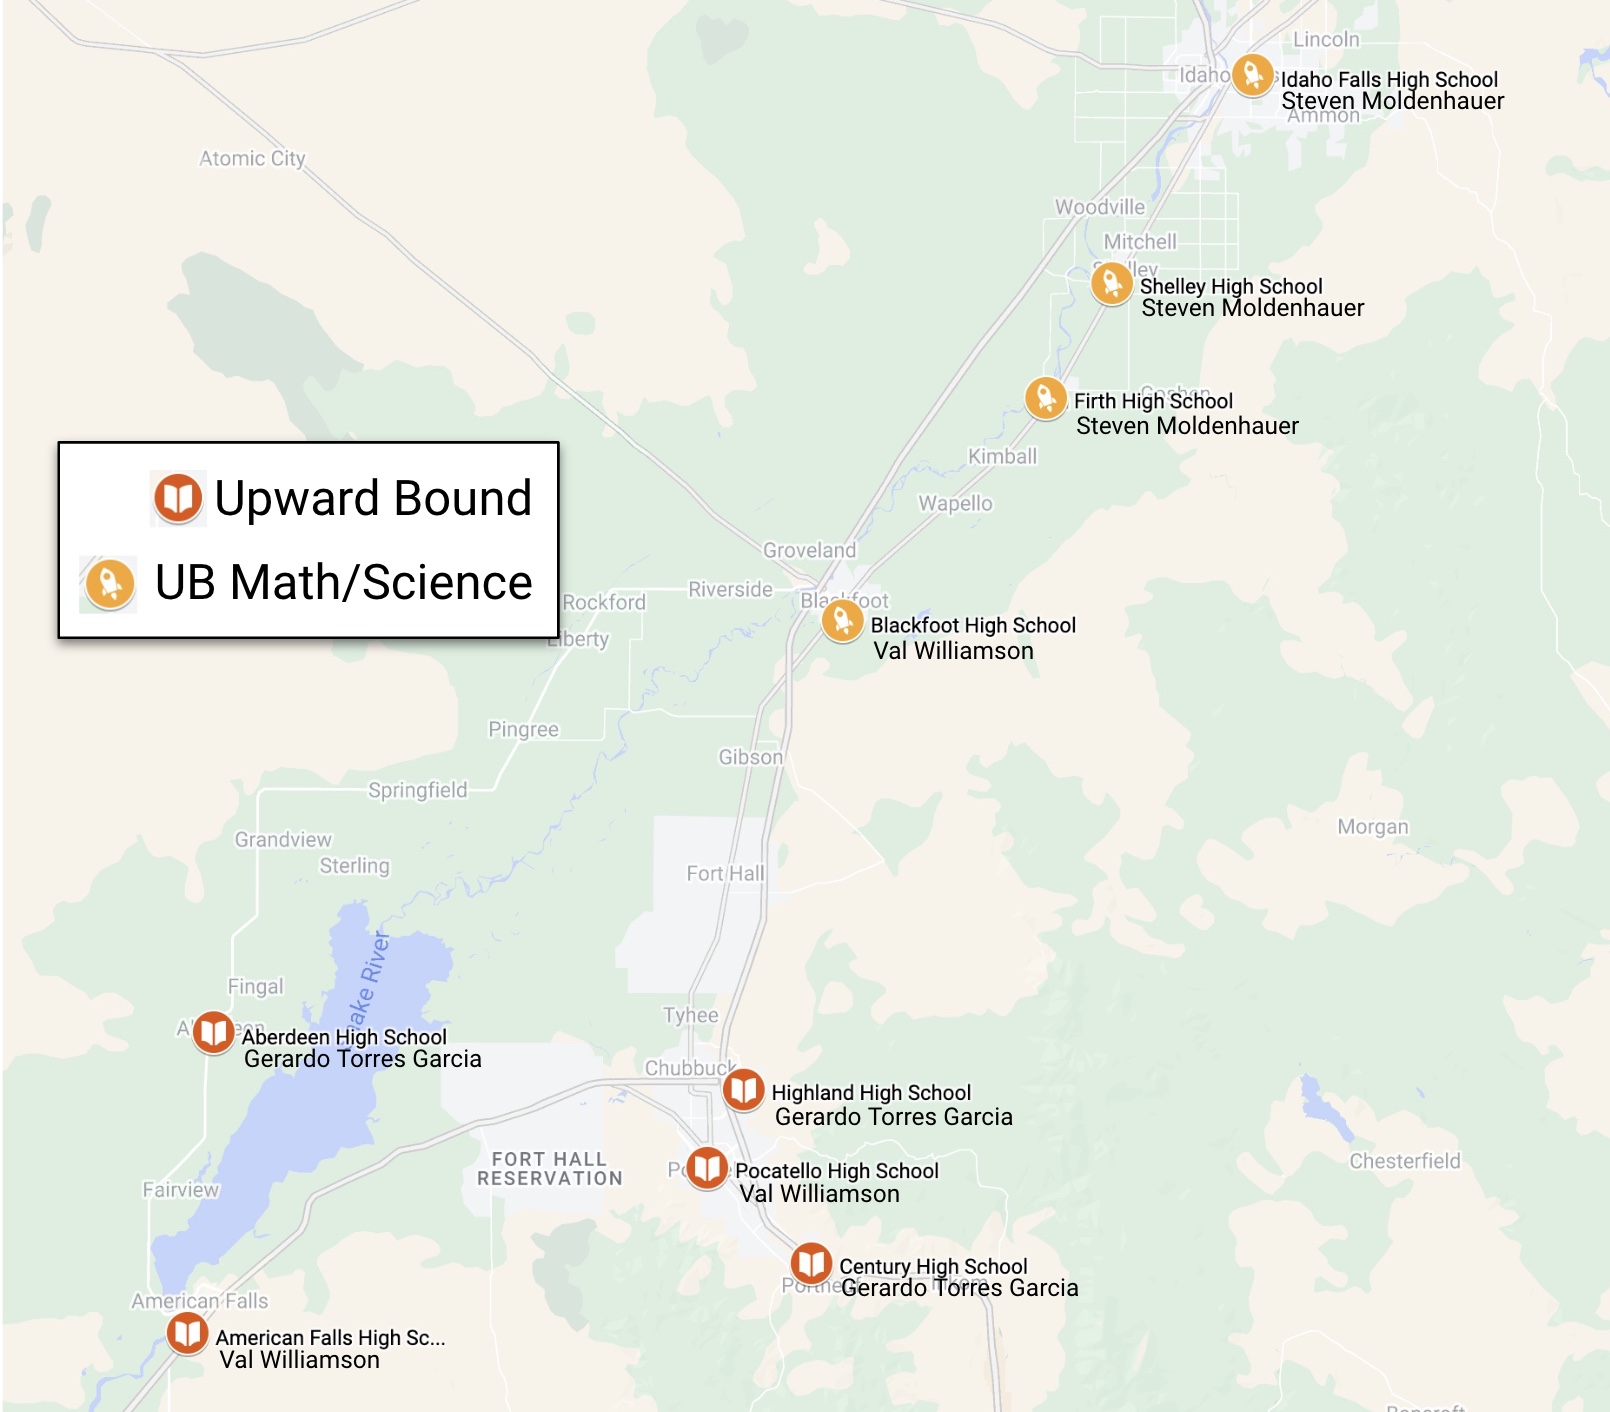 Map of high schools served by Upward Bound Programs